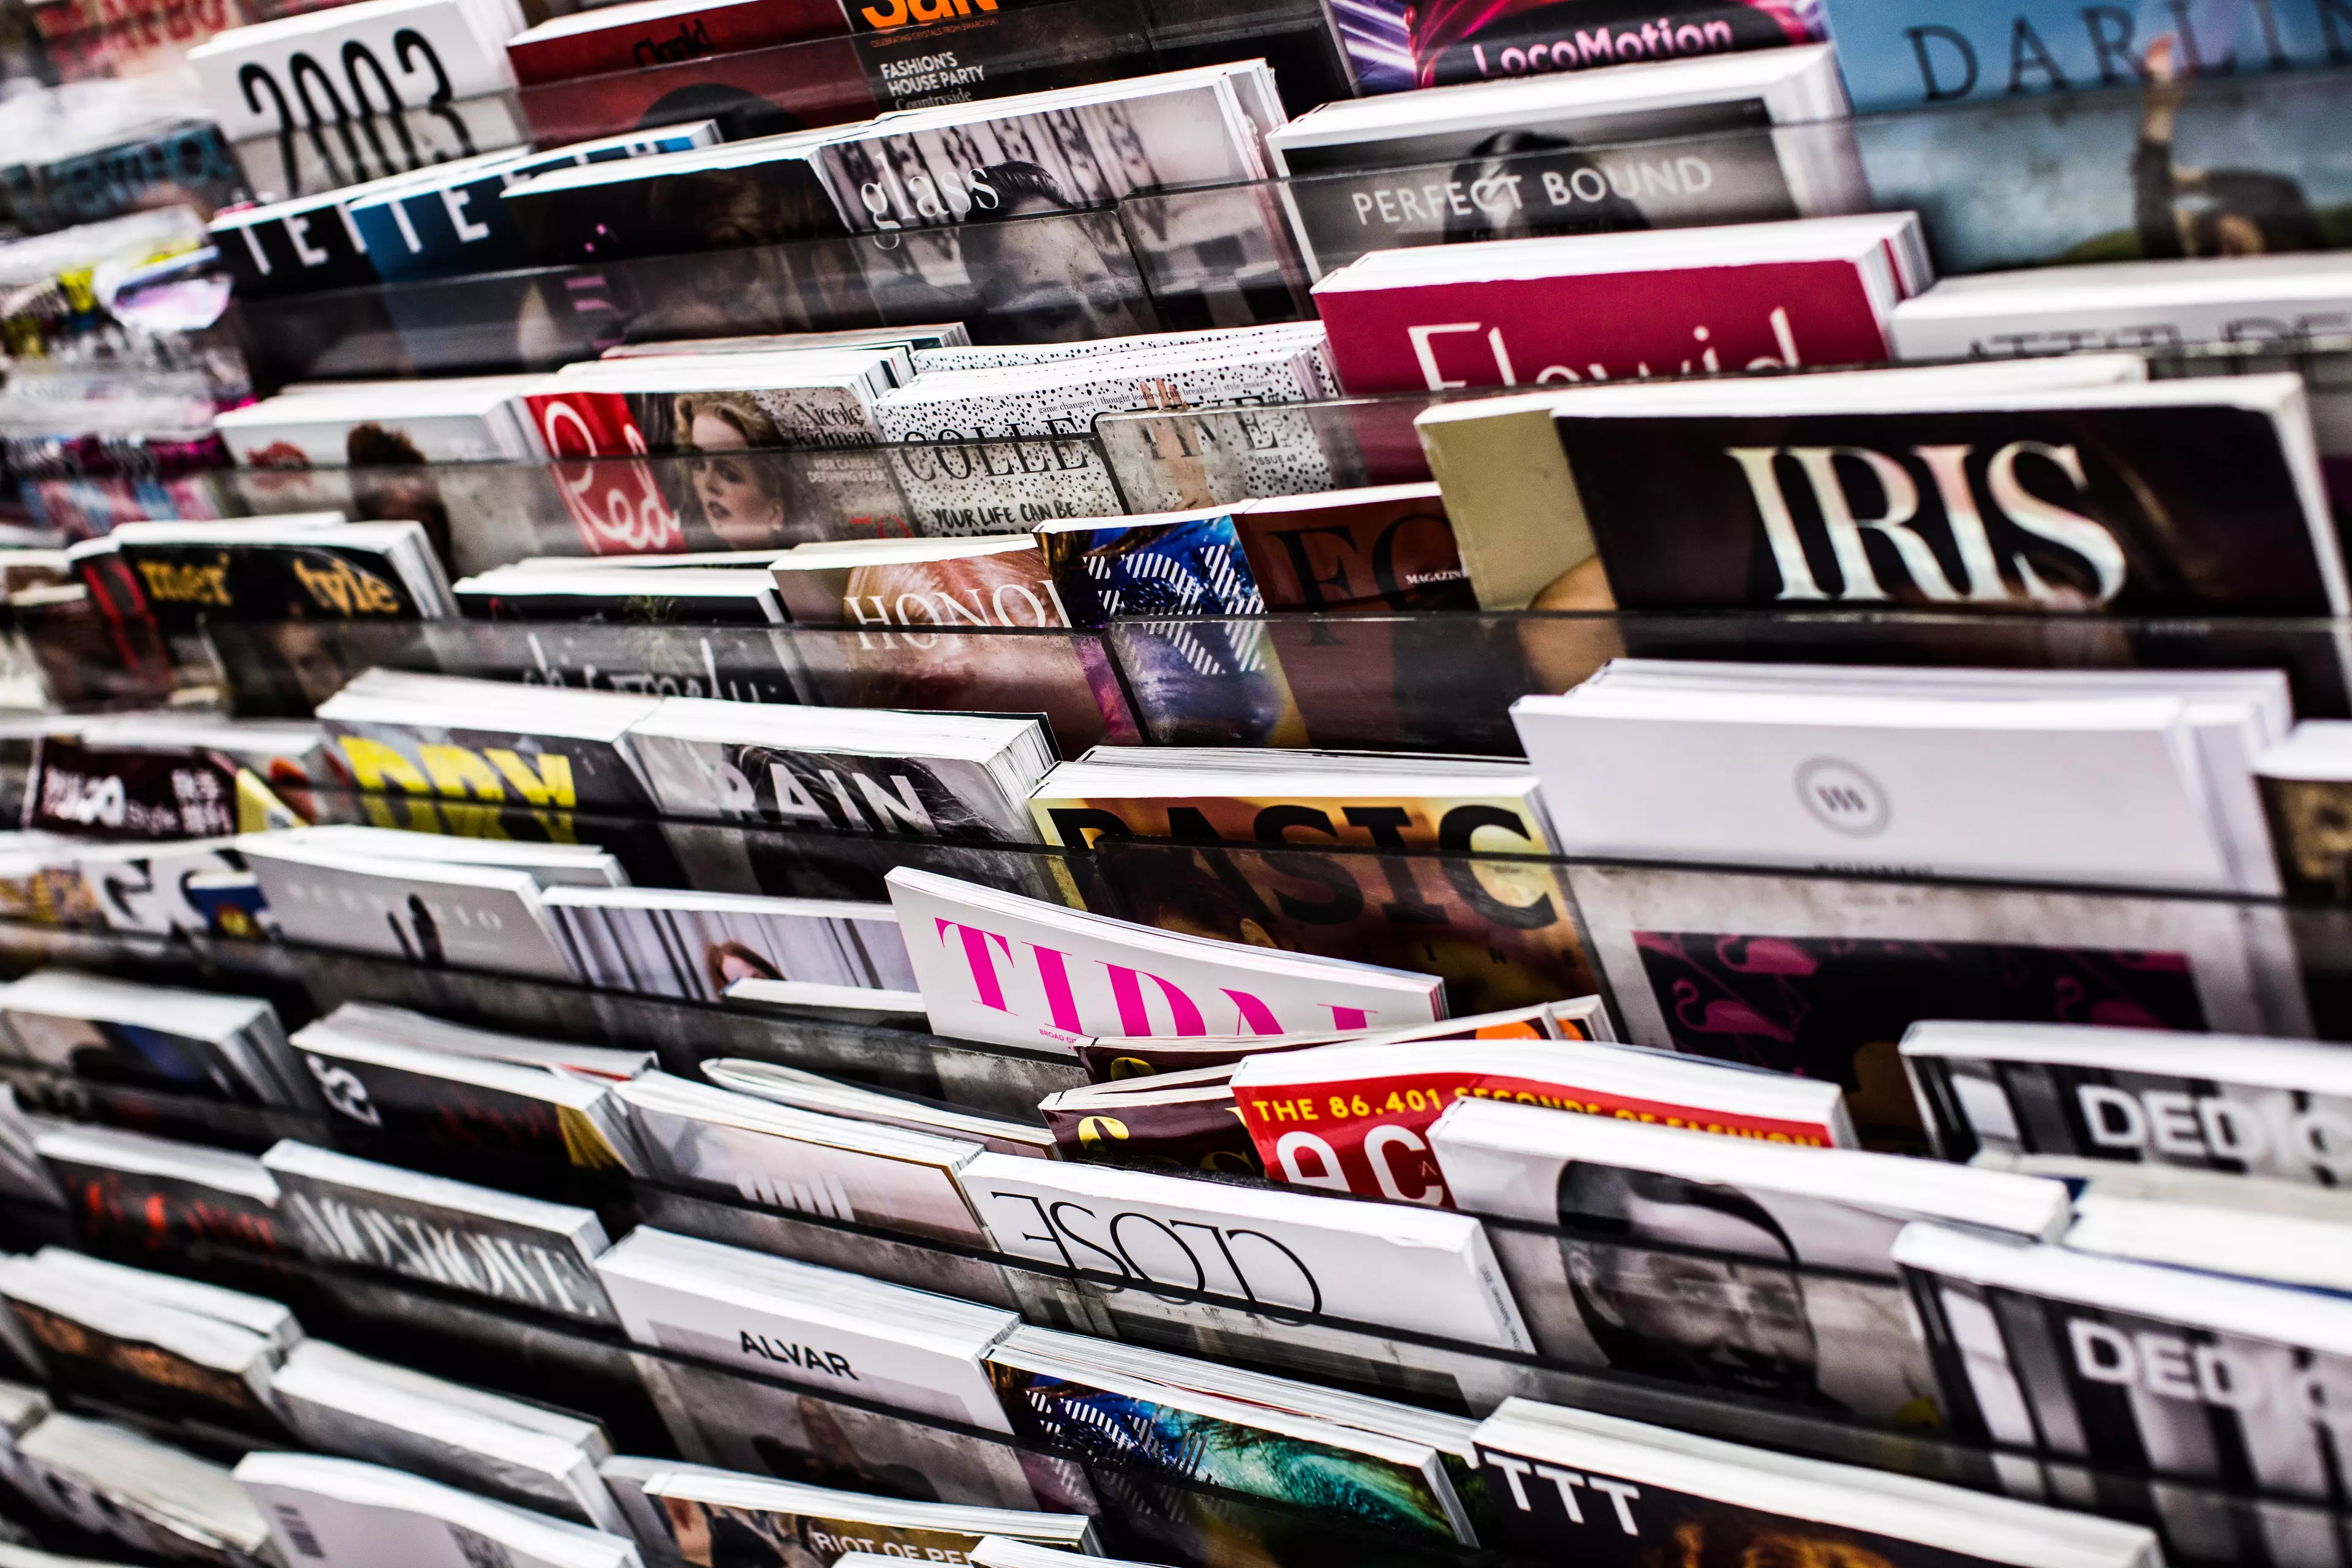 The service is reportedly recruiting through magazine ads (